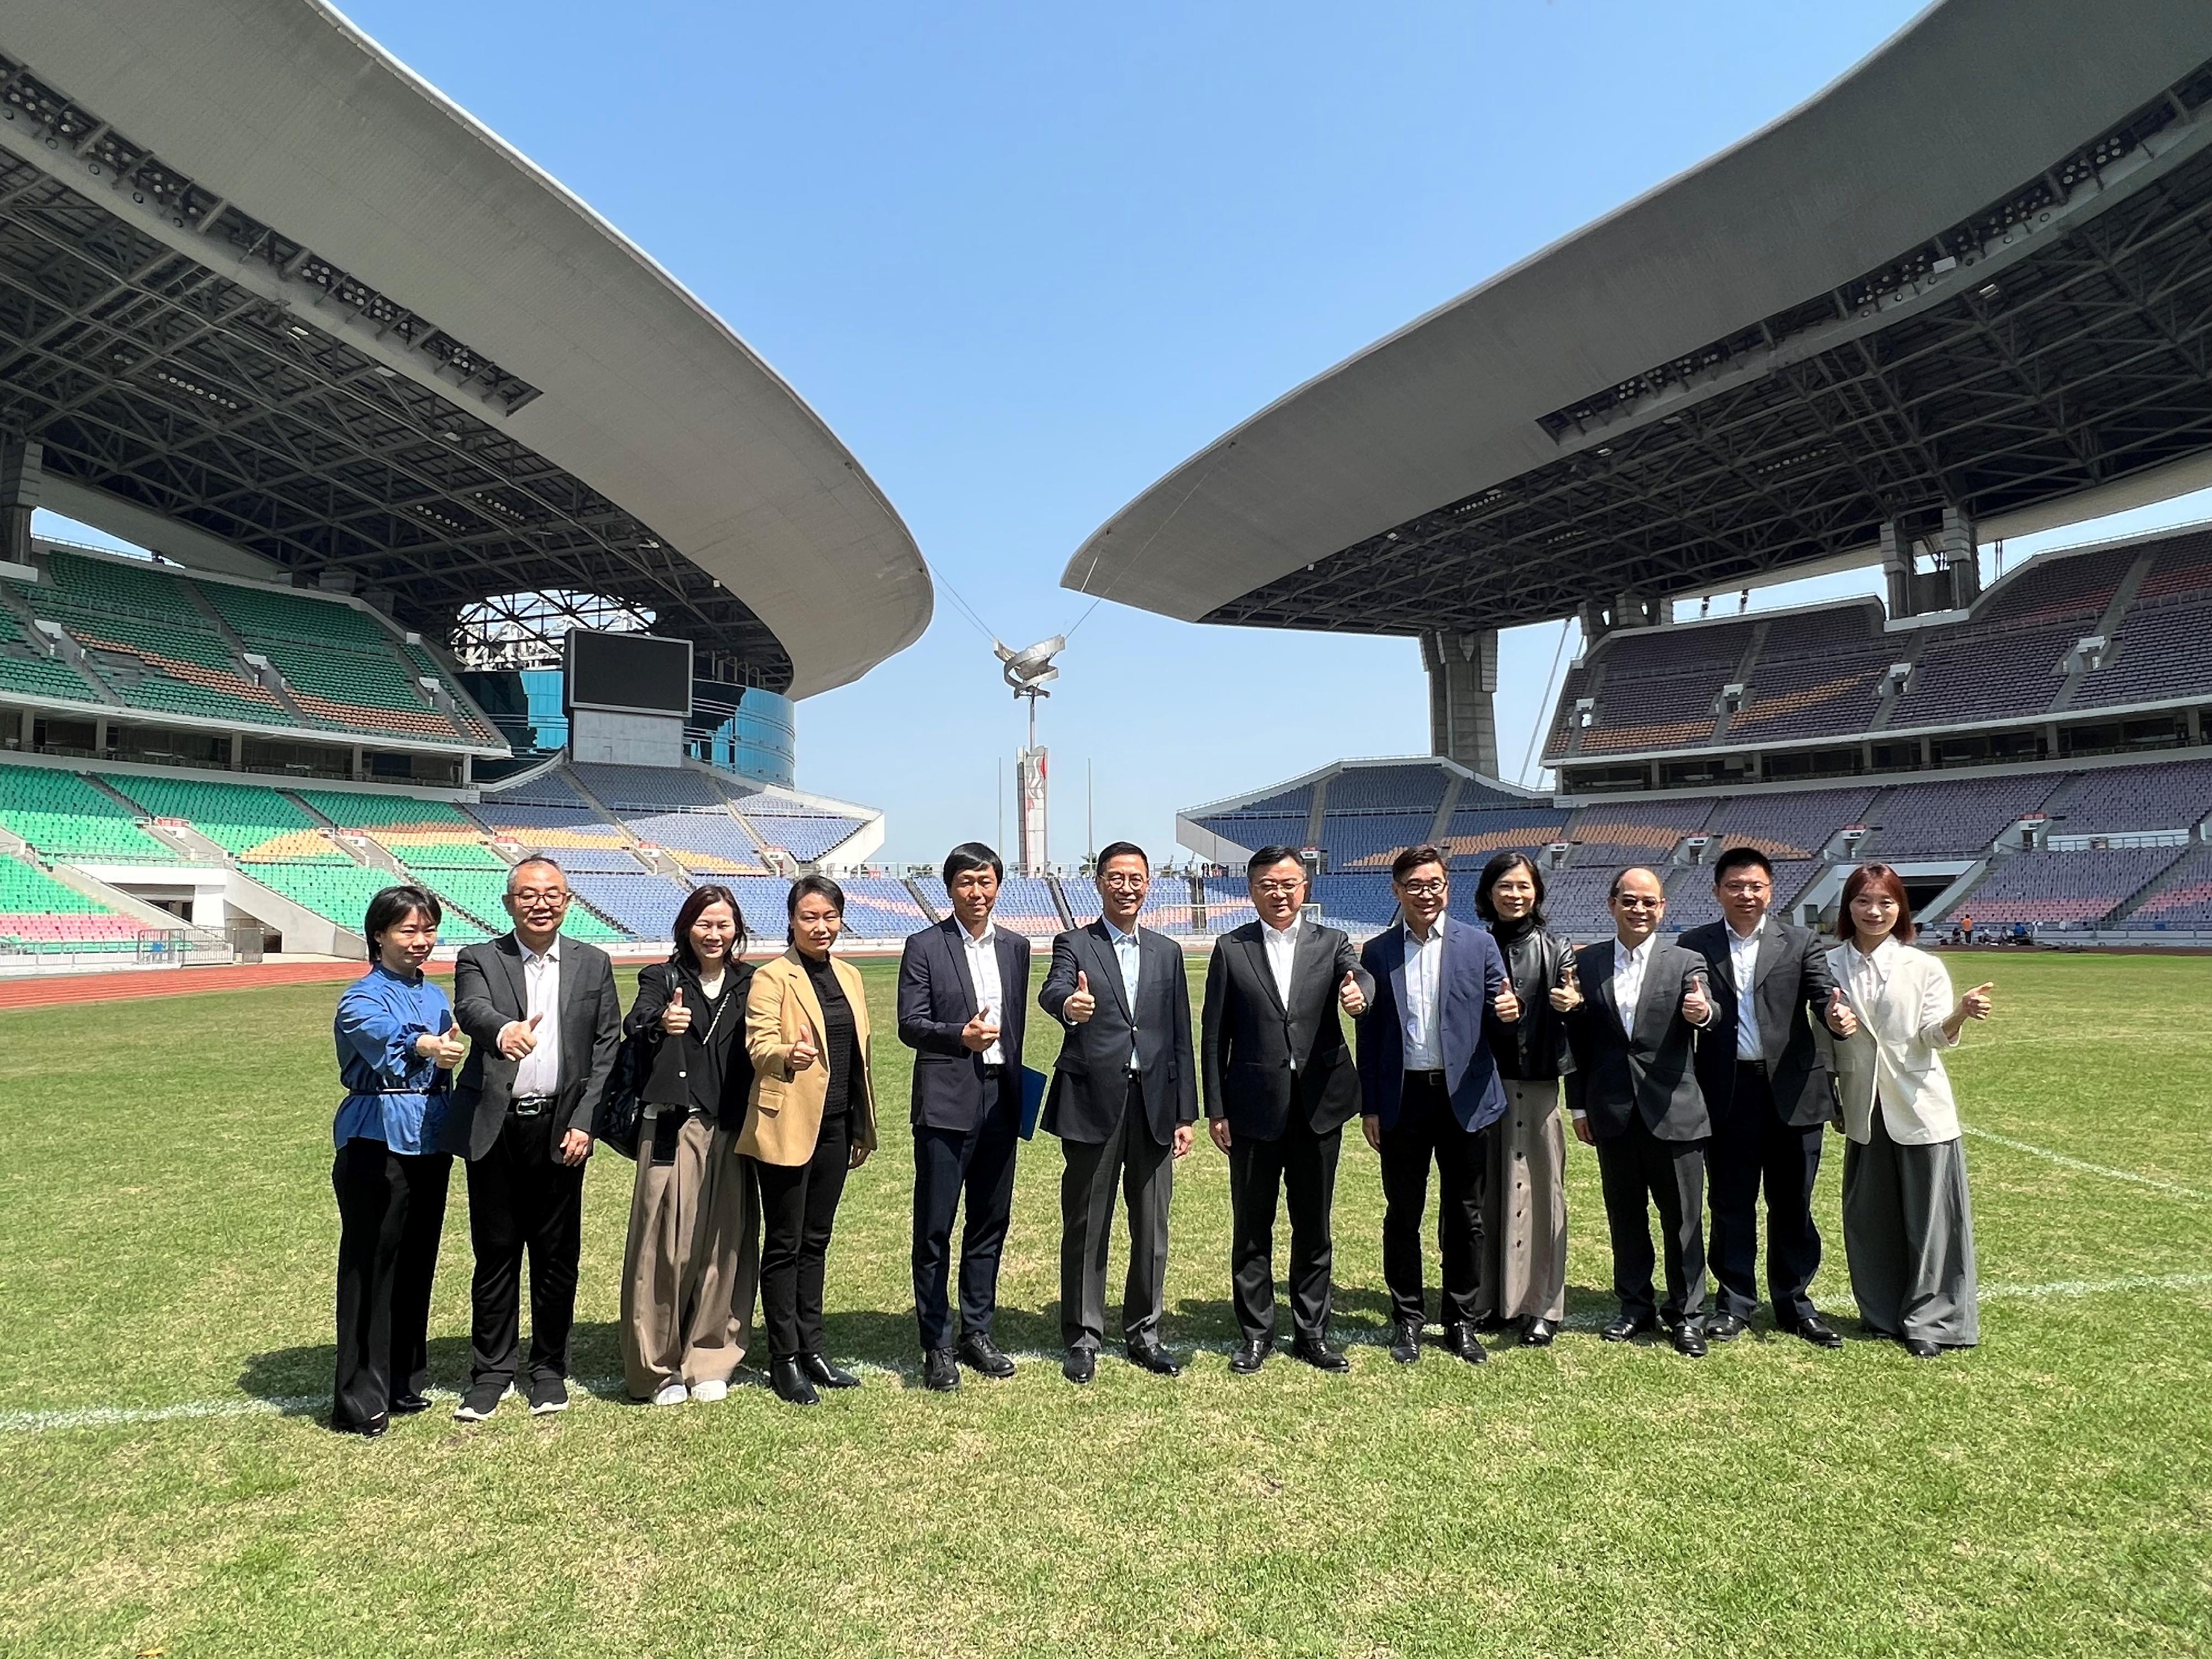 The Secretary for Culture, Sports and Tourism, Mr Kevin Yeung (sixth left), today (March 20) meets with the Head of the Sports Bureau of Guangdong Province, Mr Cui Jian (sixth right), in Guangzhou and visited the Guangdong Olympic Sports Center. The Head of the National Games Coordination Office (NGCO), Mr Yeung Tak-keung (third right), and the Deputy Head of the NGCO, Mr Paul Cheng (first right), also join the visit.